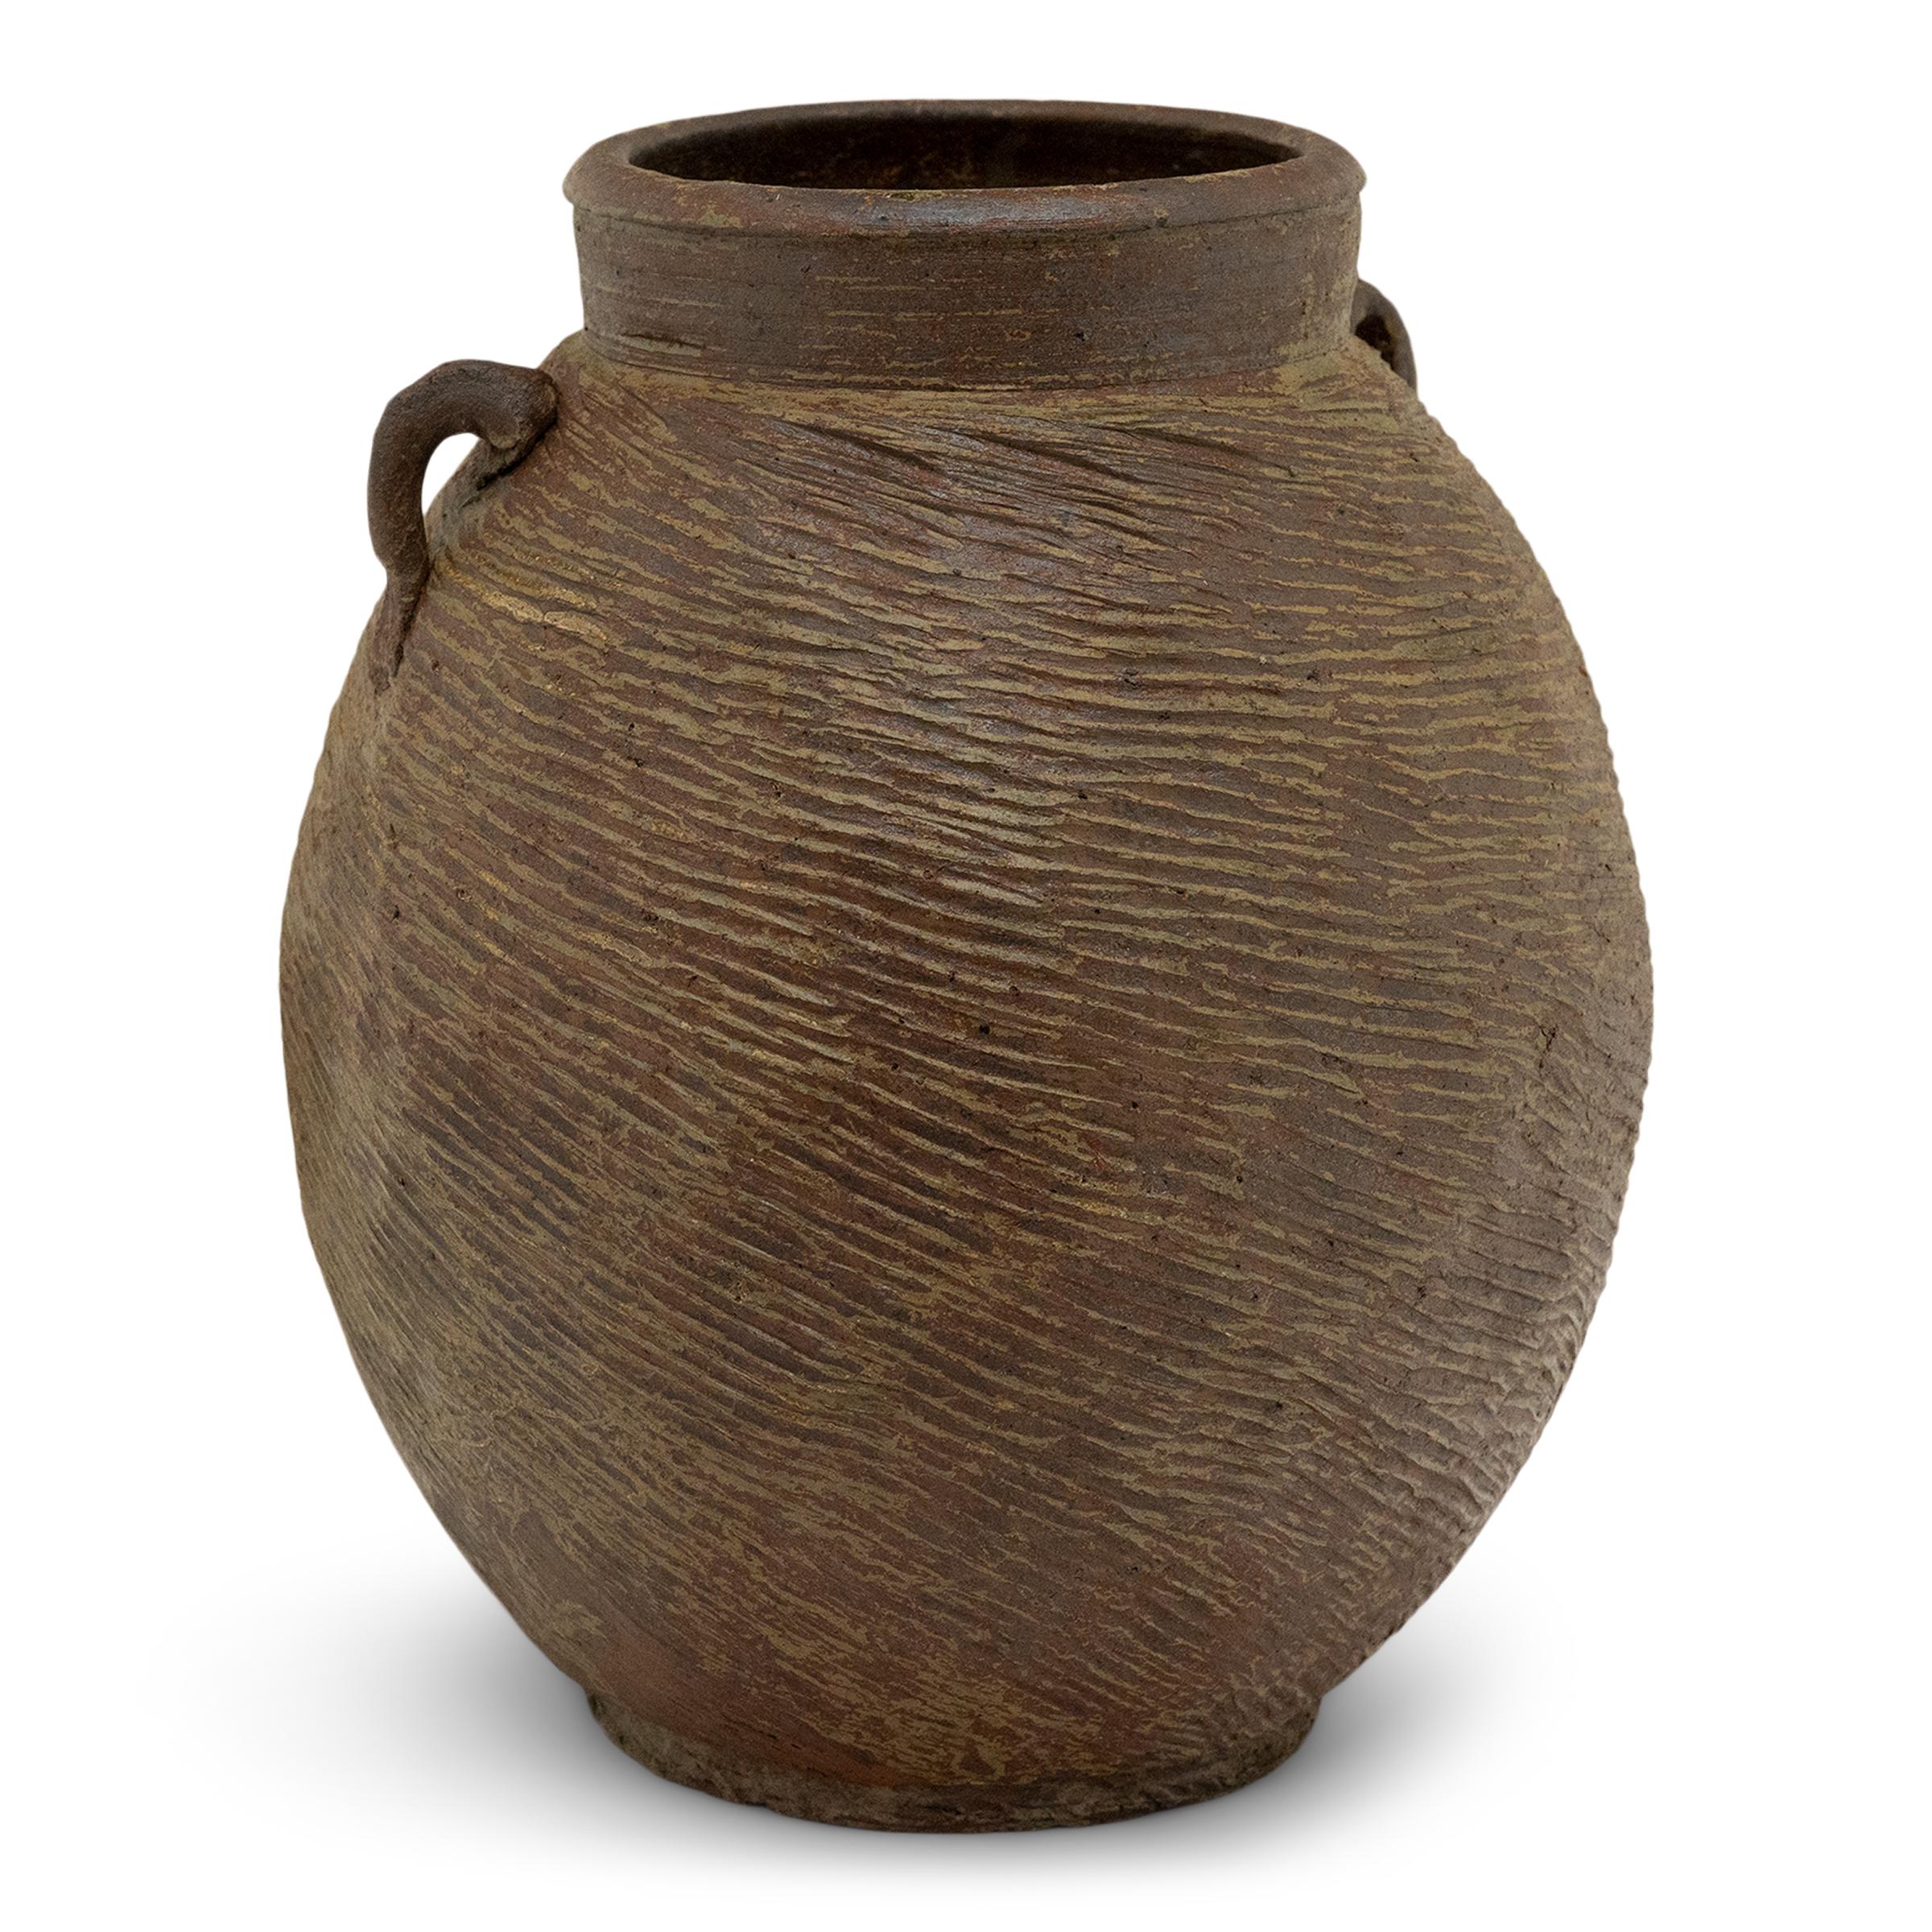 Cloaked in a beautifully irregular brown-green slip finish, this 19th-century earthenware pot was charged with the humble task of storing dry goods in a Qing dynasty kitchen. The lobed pot has a round form with a narrow base and a tall neck flanked